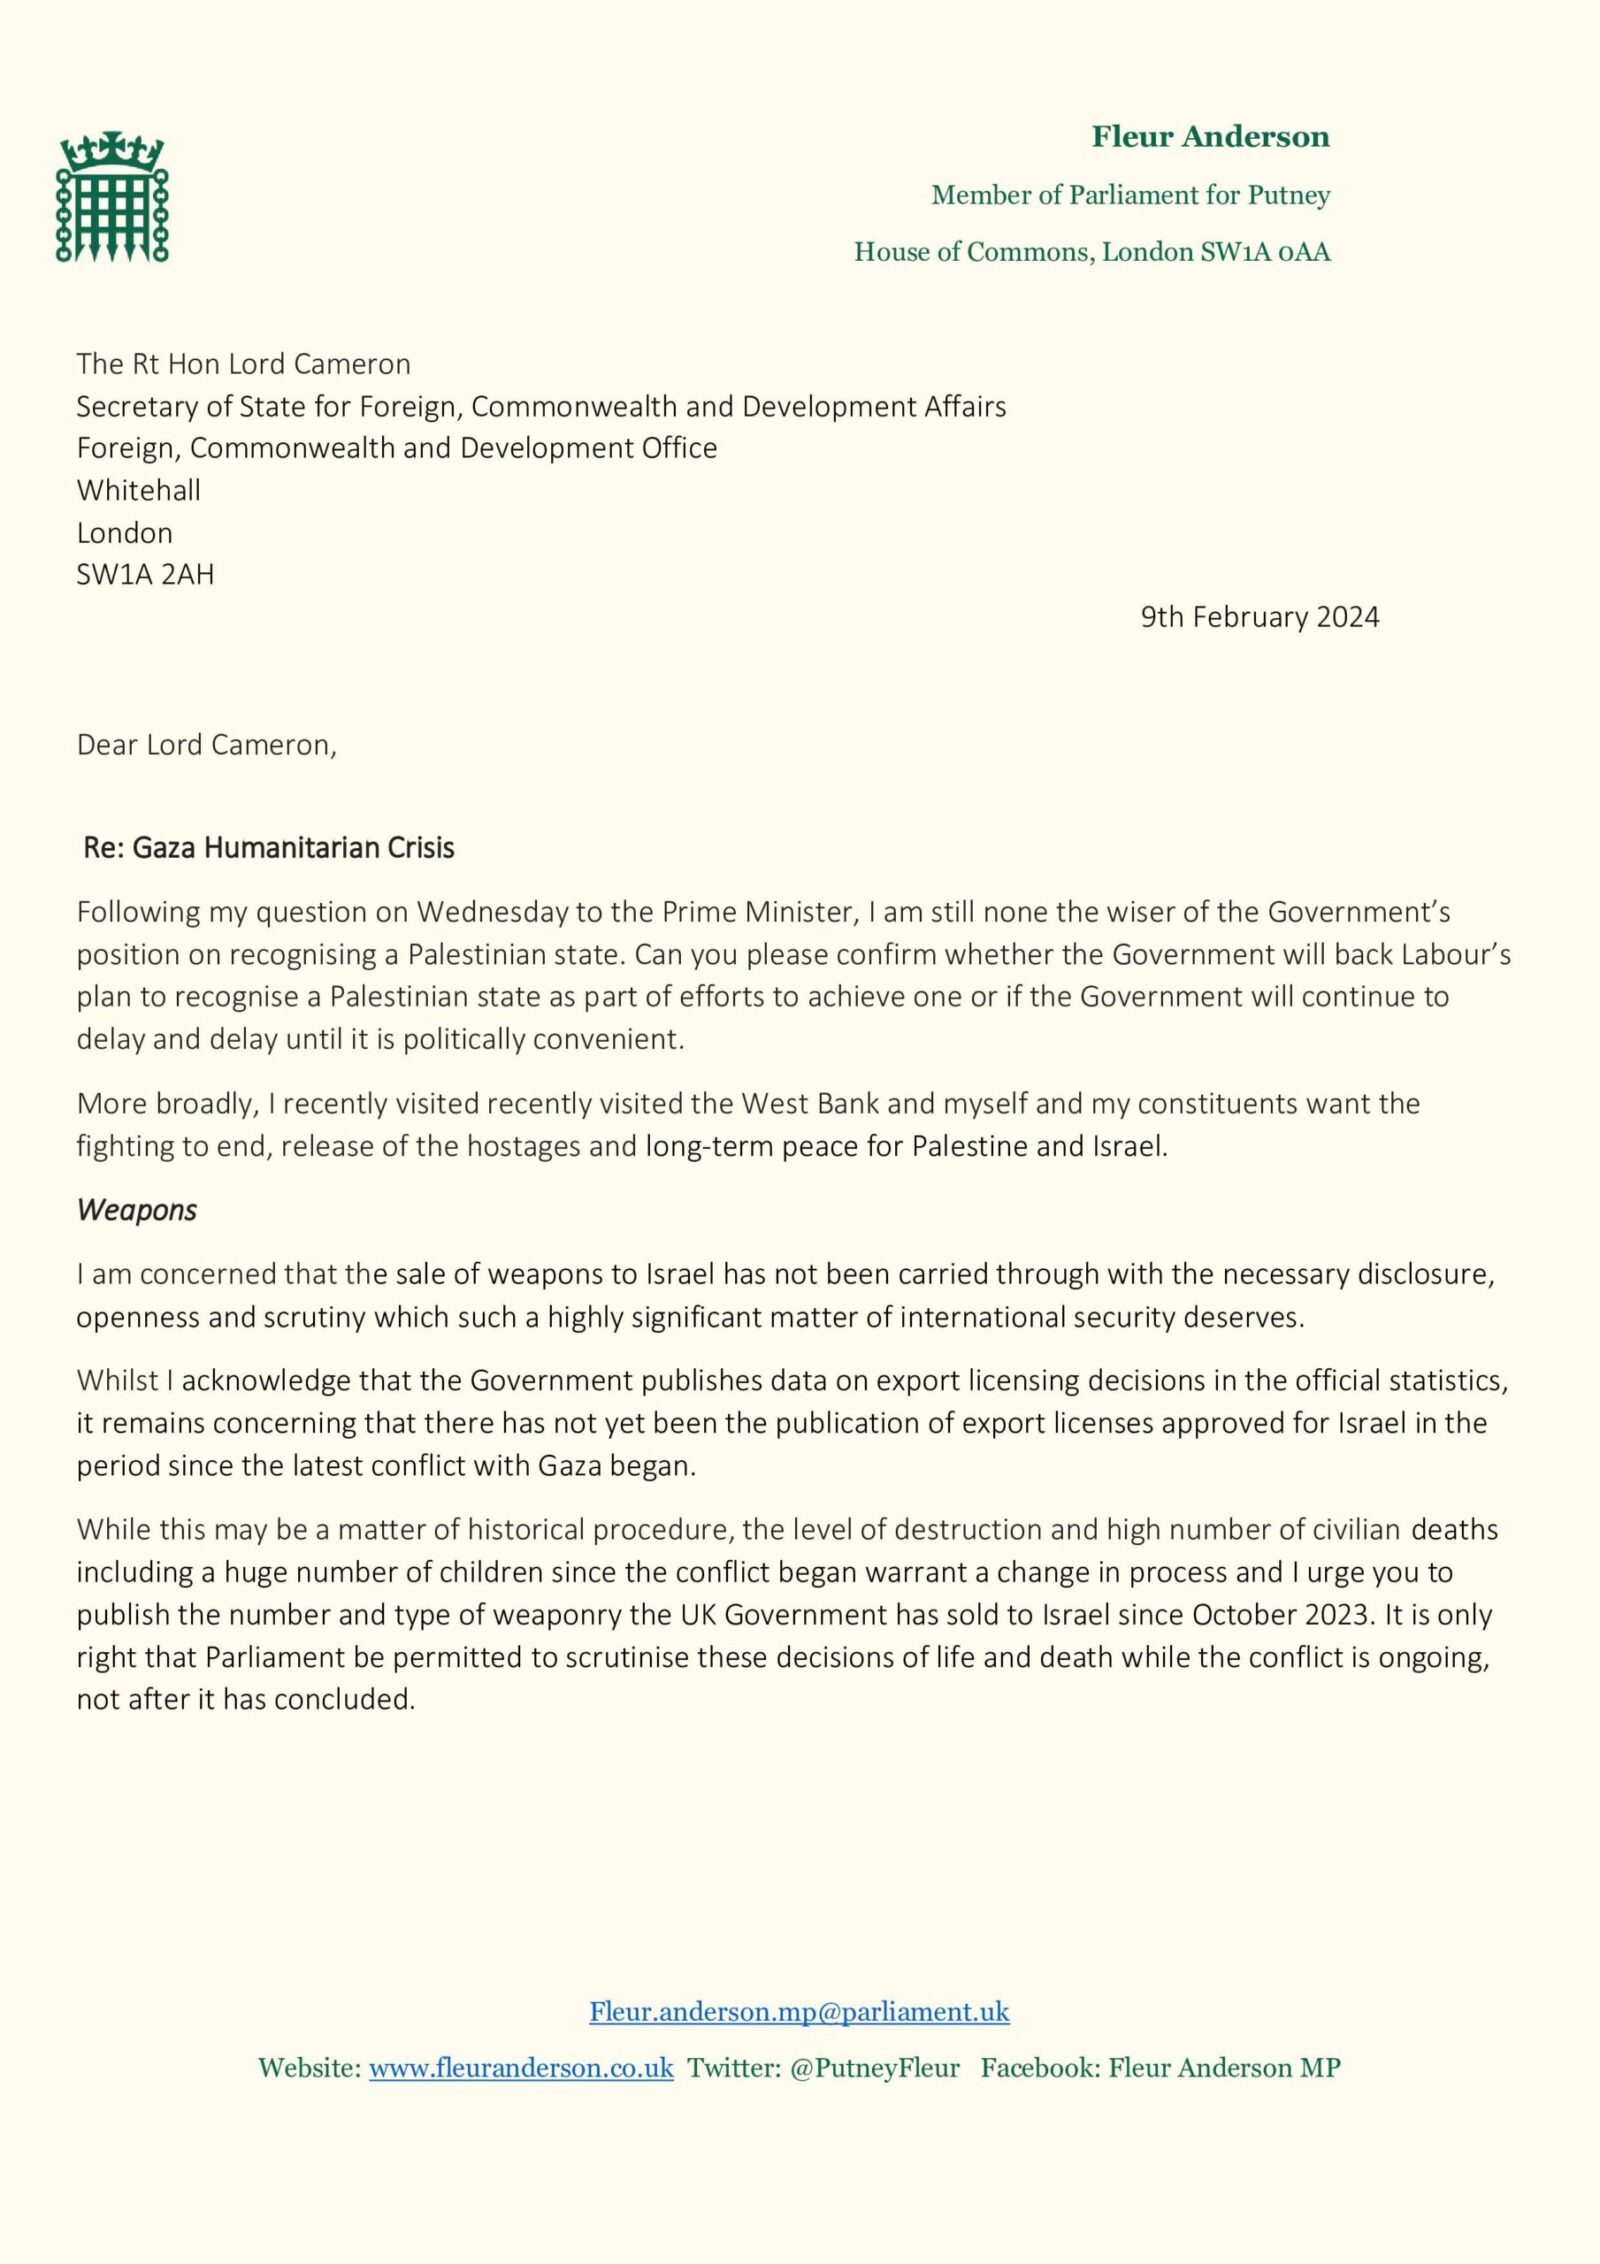 Letter to Lord Cameron page 1